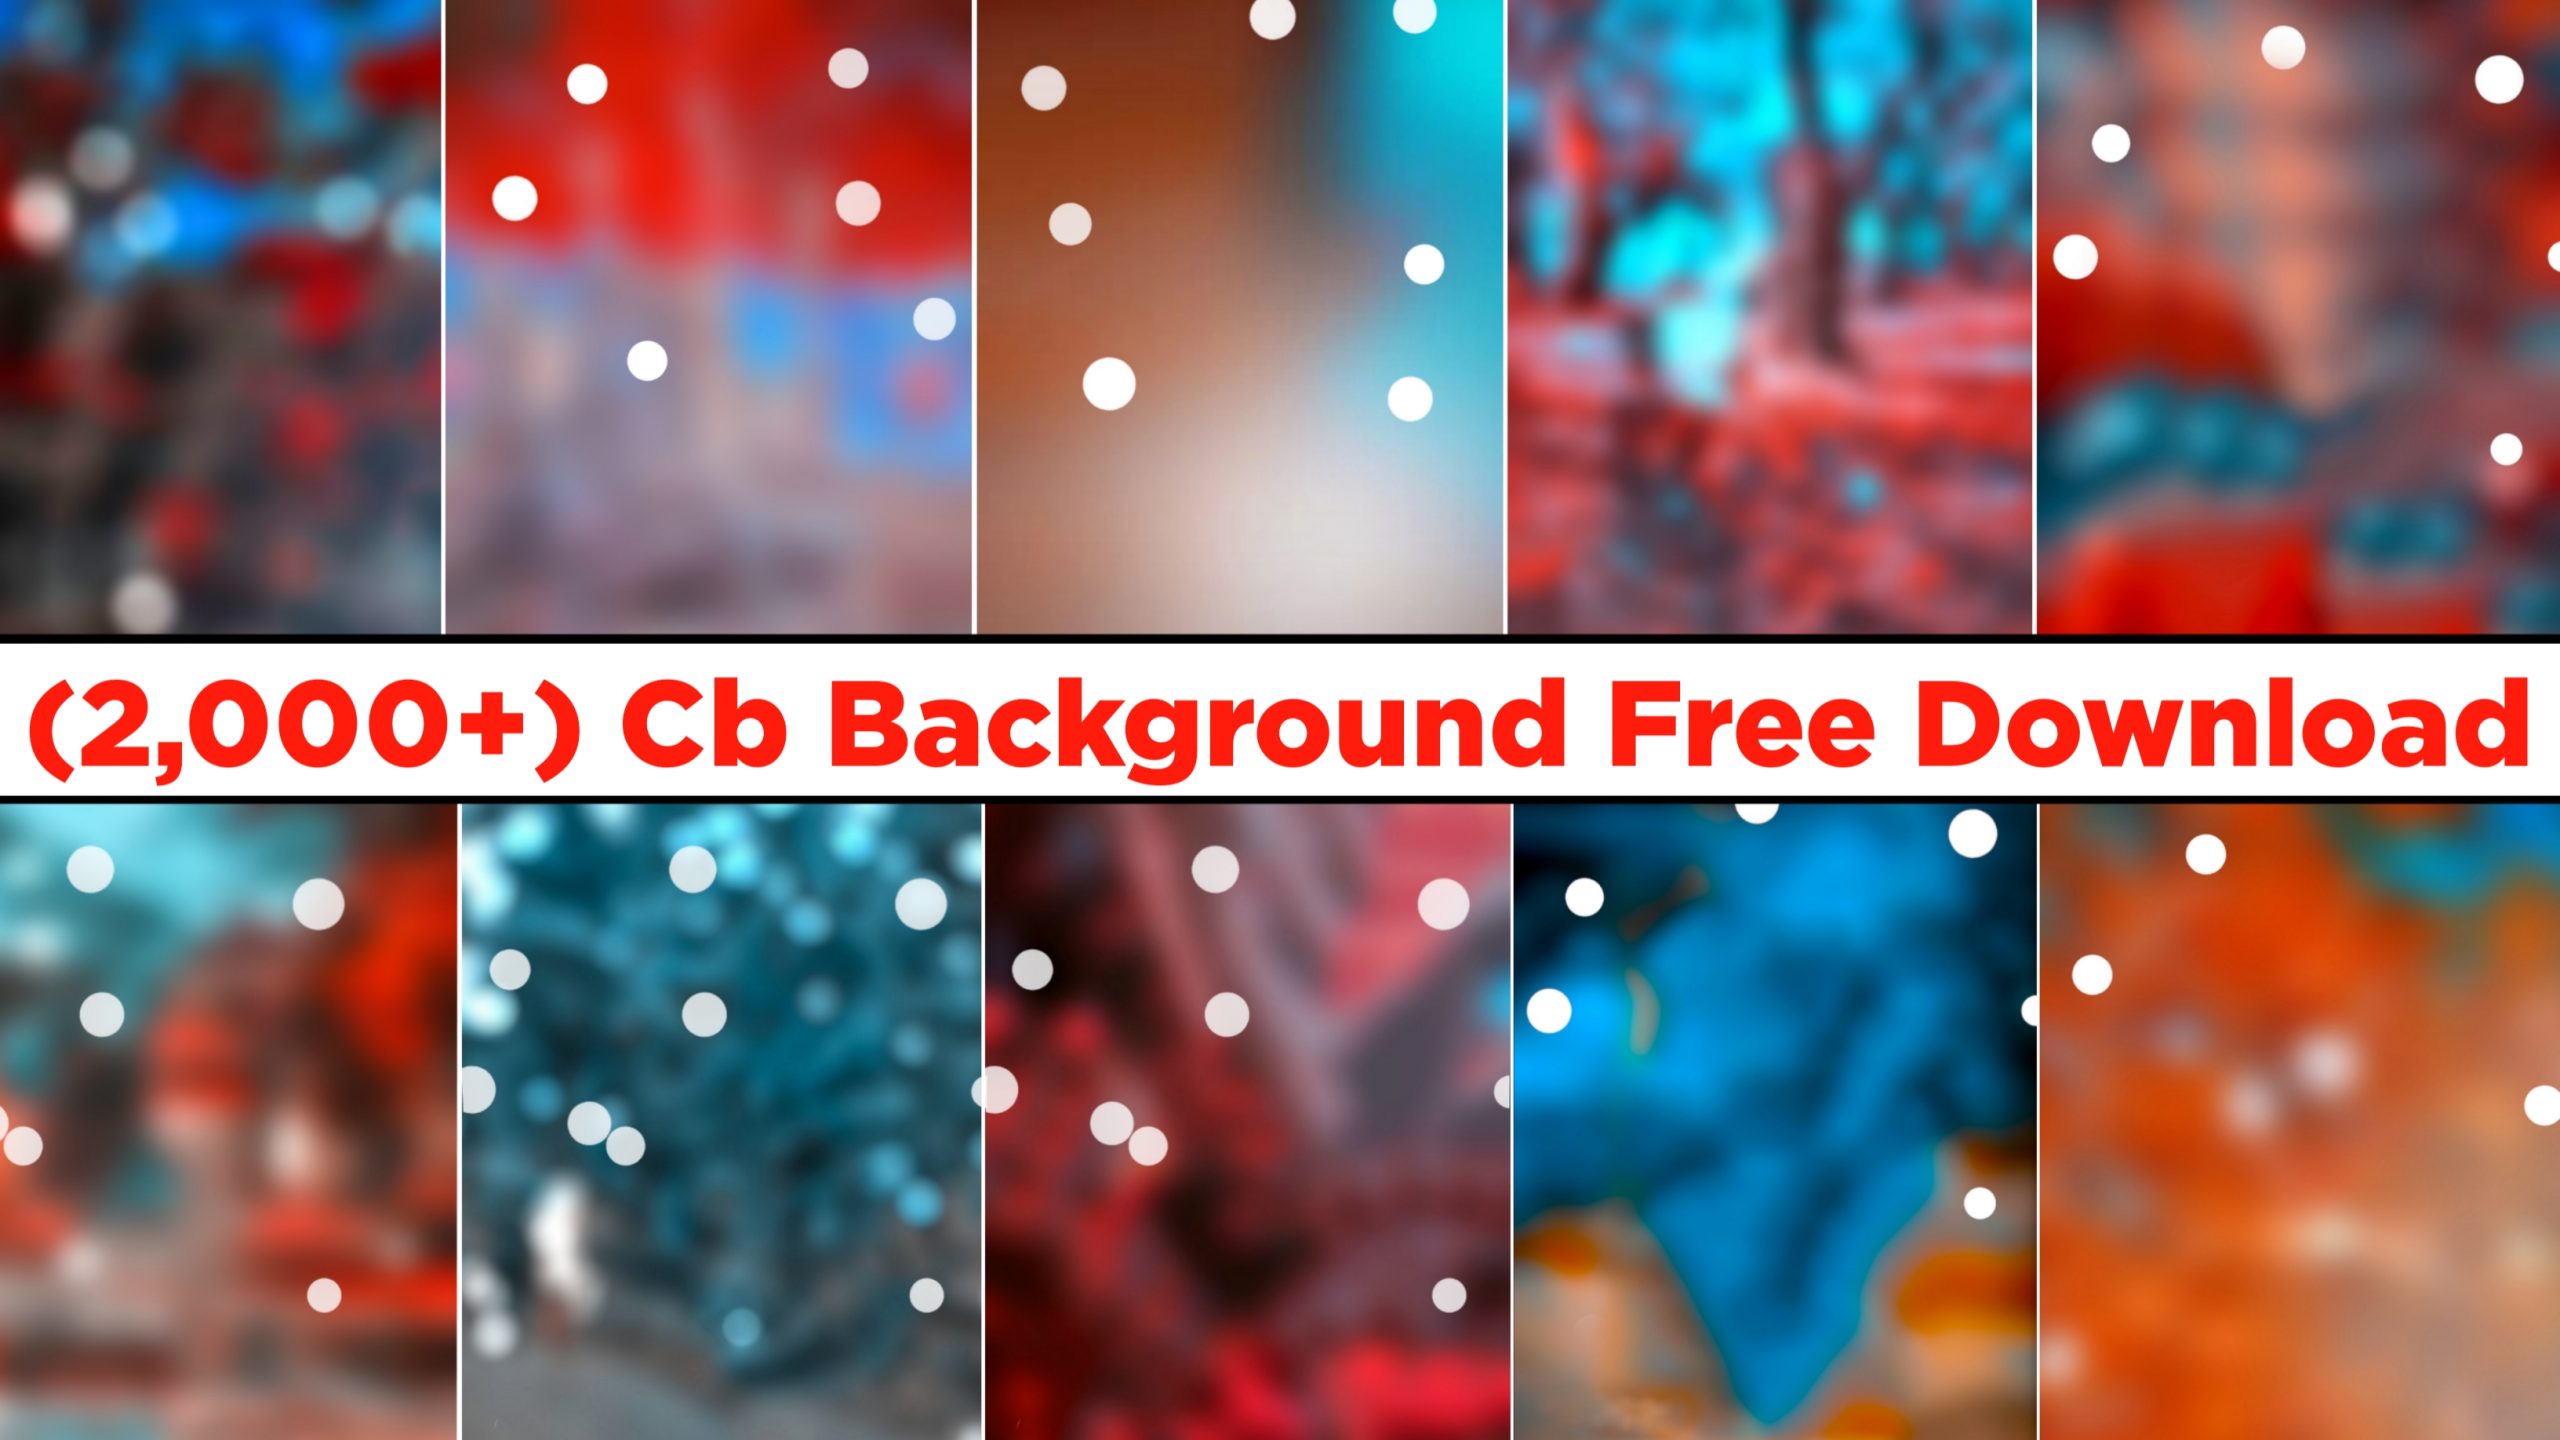 100 CB Background Download in 1 Click  Free Full HD Cb Background   Download in Zip File  YouTube